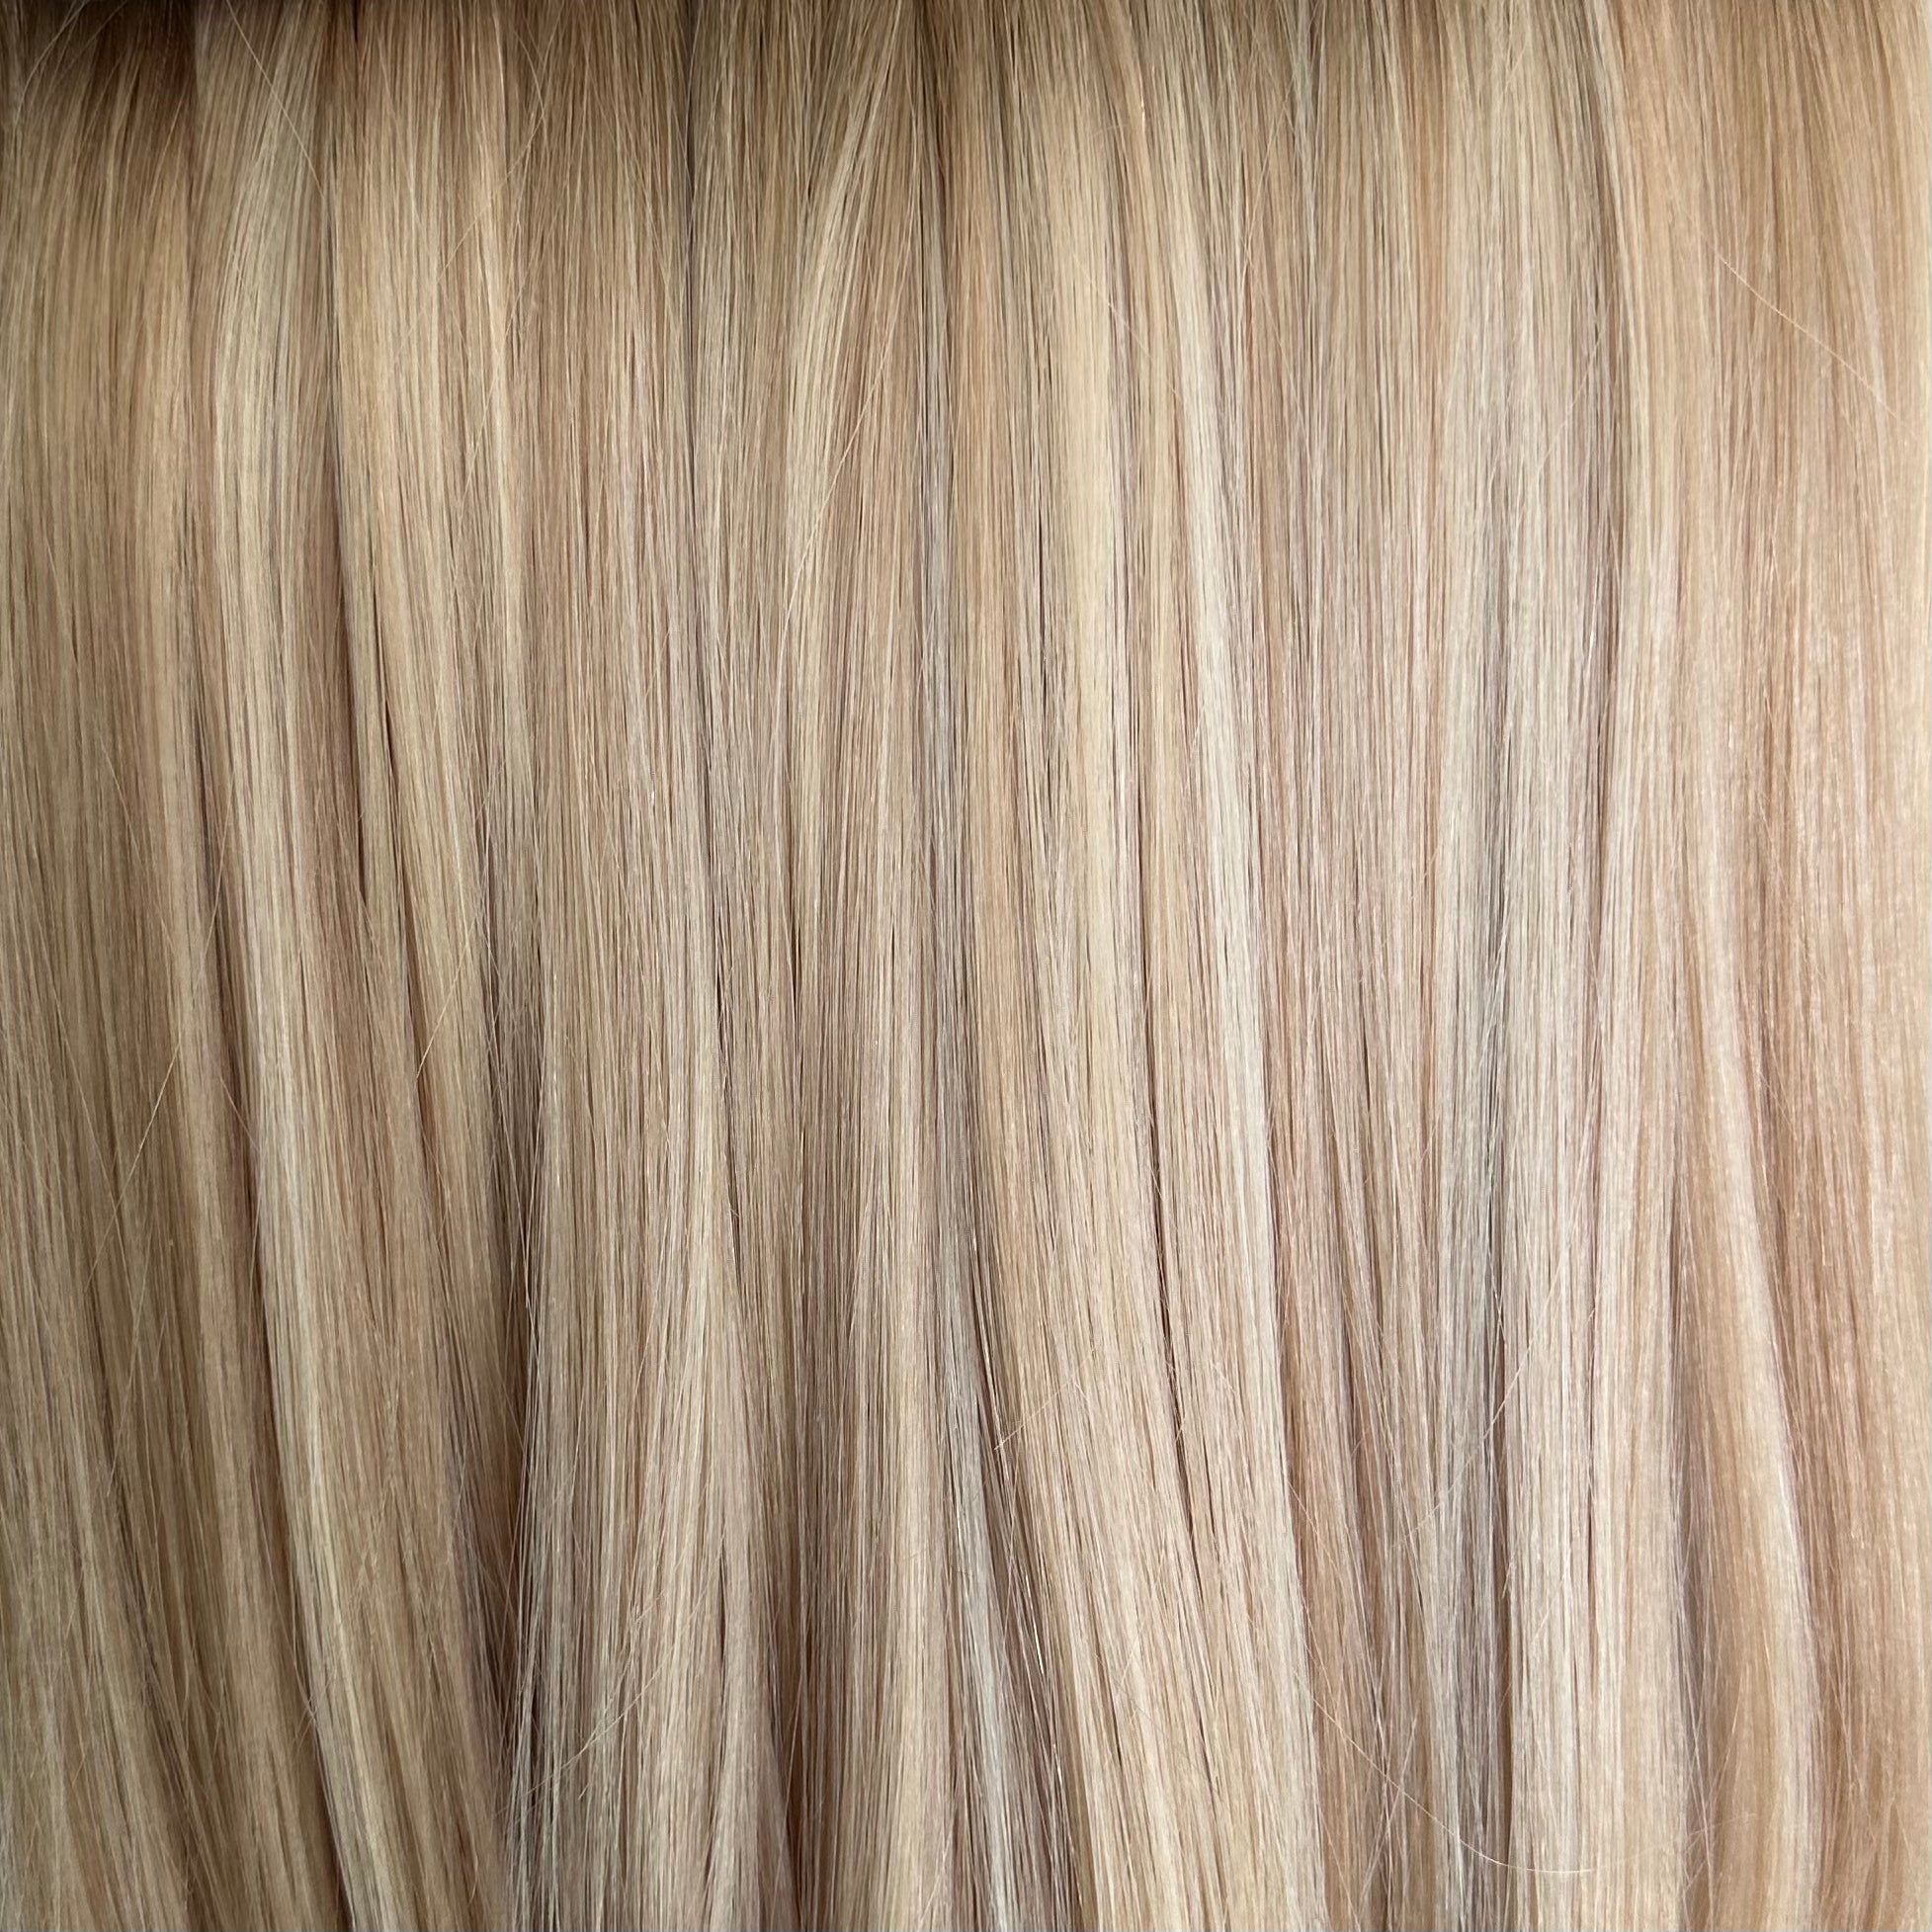 Rooted Sunkissed Blonde - InterMix Wefts